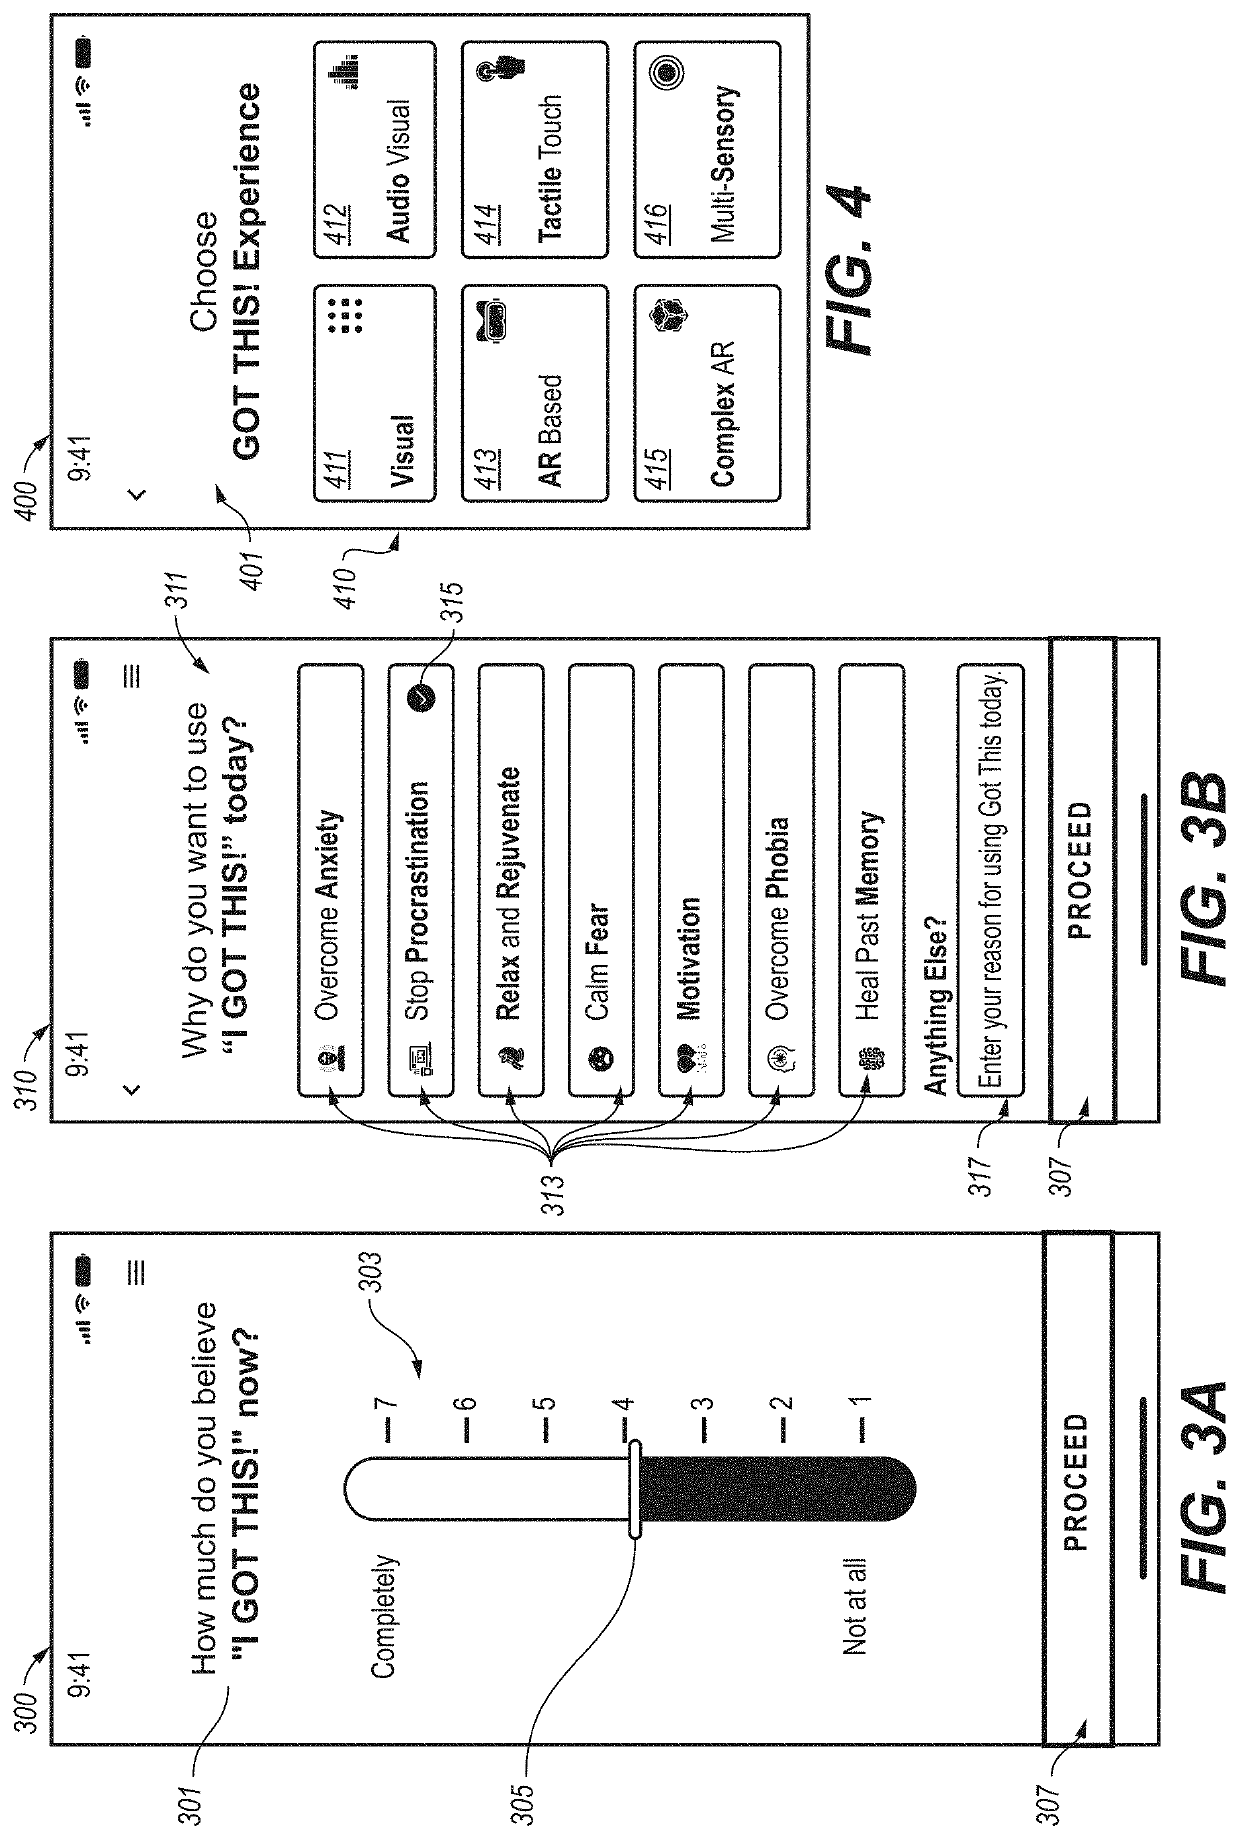 Method and apparatus of tracking progress from bilateral stimulation sessions